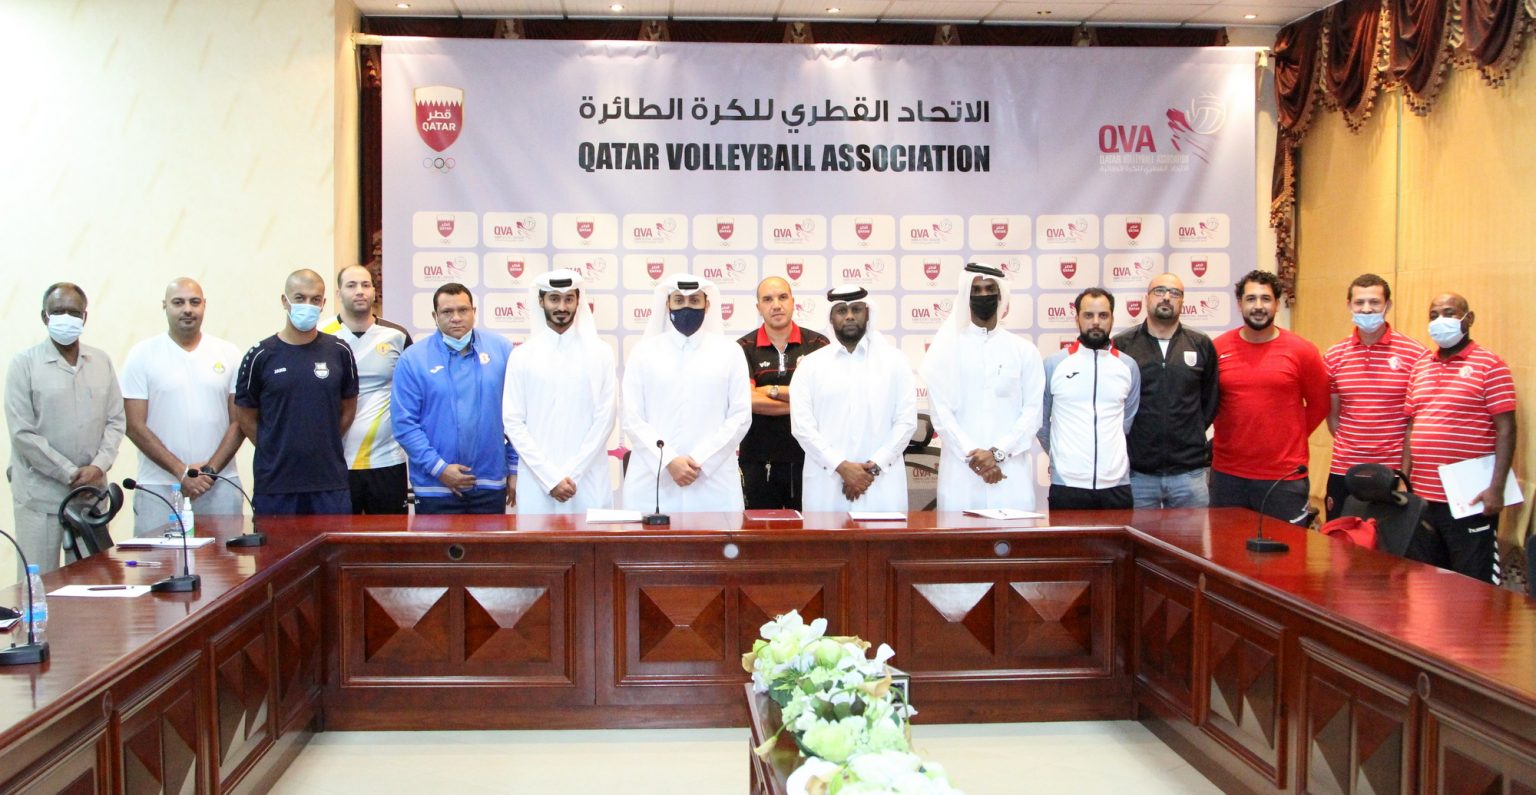 QVA CONDUCTS DRAWING OF LOTS FOR 4TH NATIONAL CHAMPIONSHIP, SENIOR MEN’S BV LEAGUE